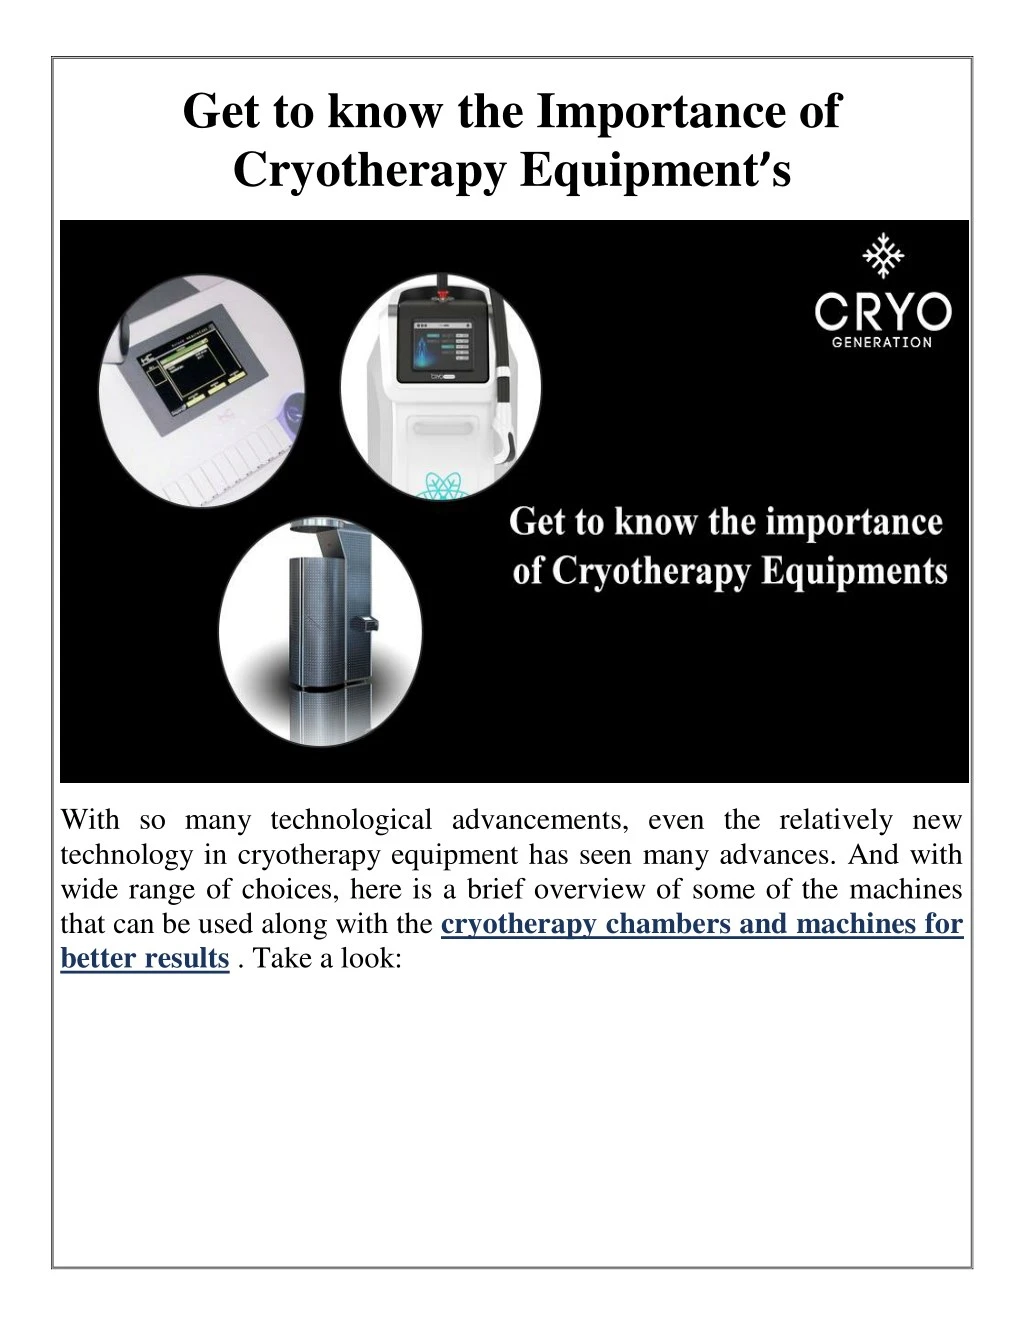 get to know the importance of cryotherapy